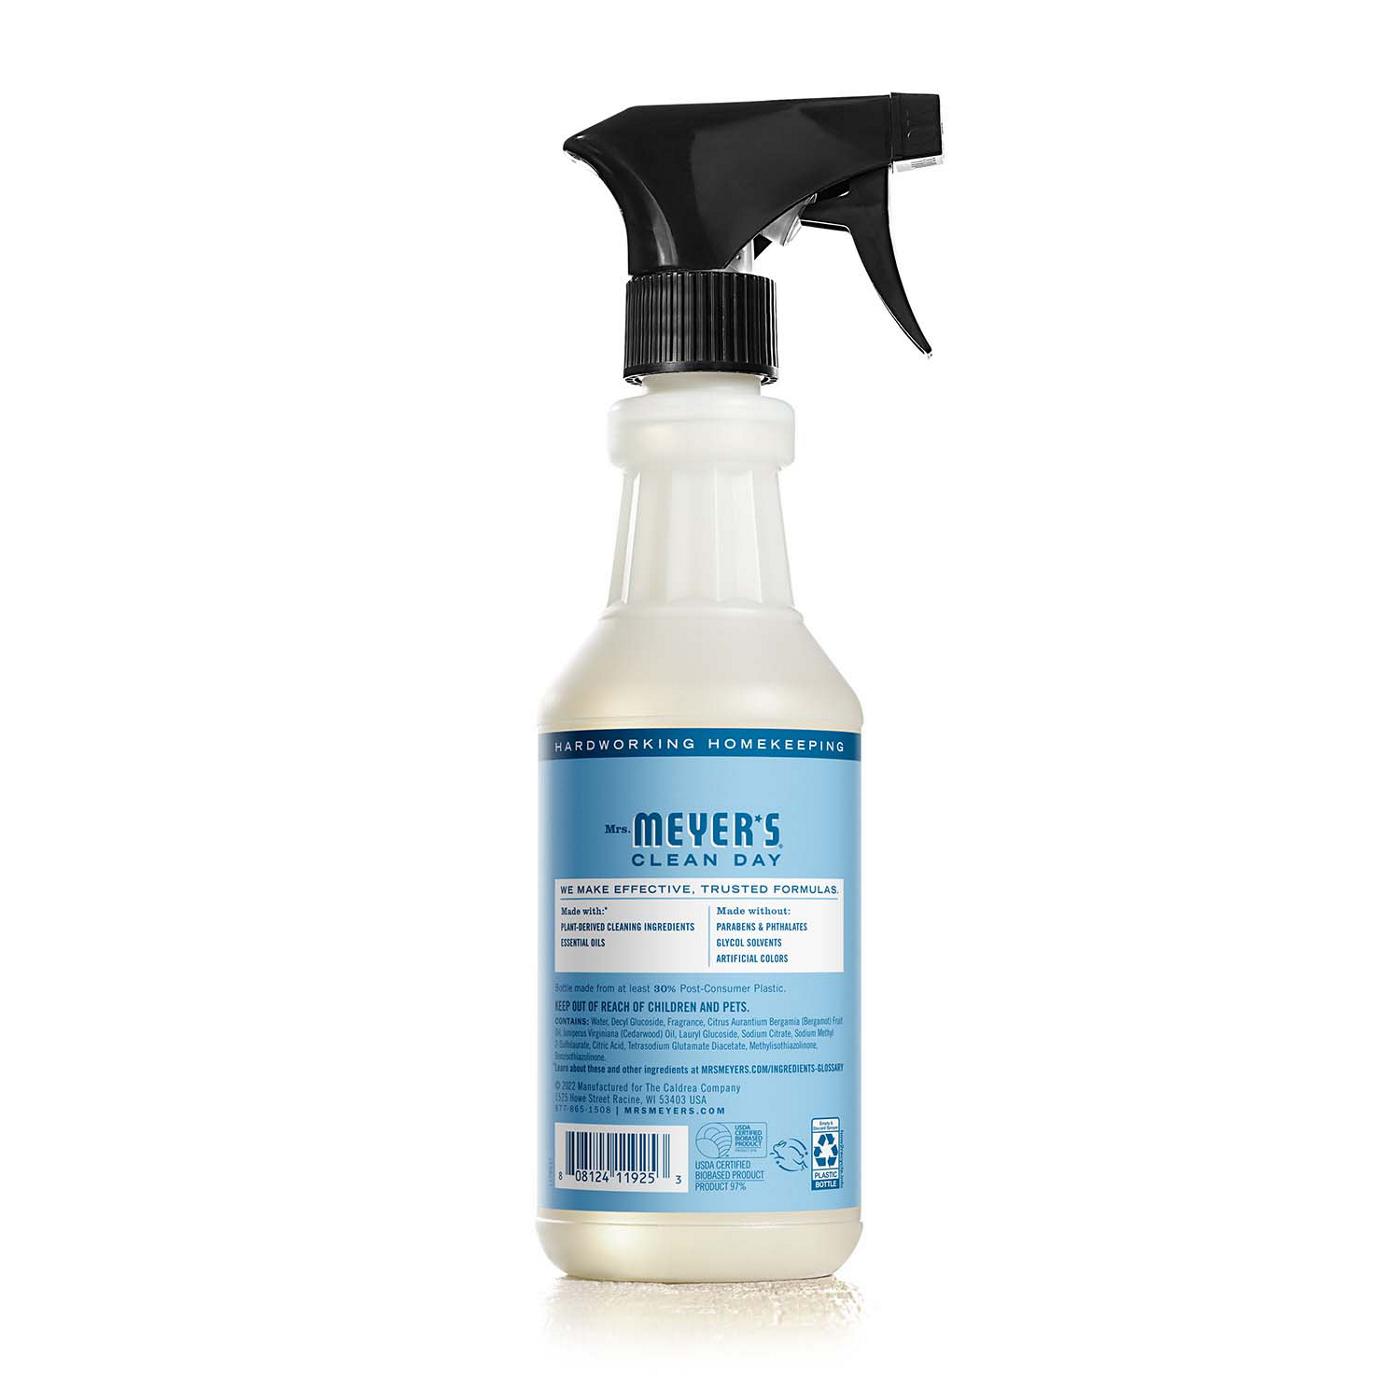 Mrs. Meyer's Clean Day Rainwater Scent Multi-Surface Everyday Cleaner Spray; image 5 of 6